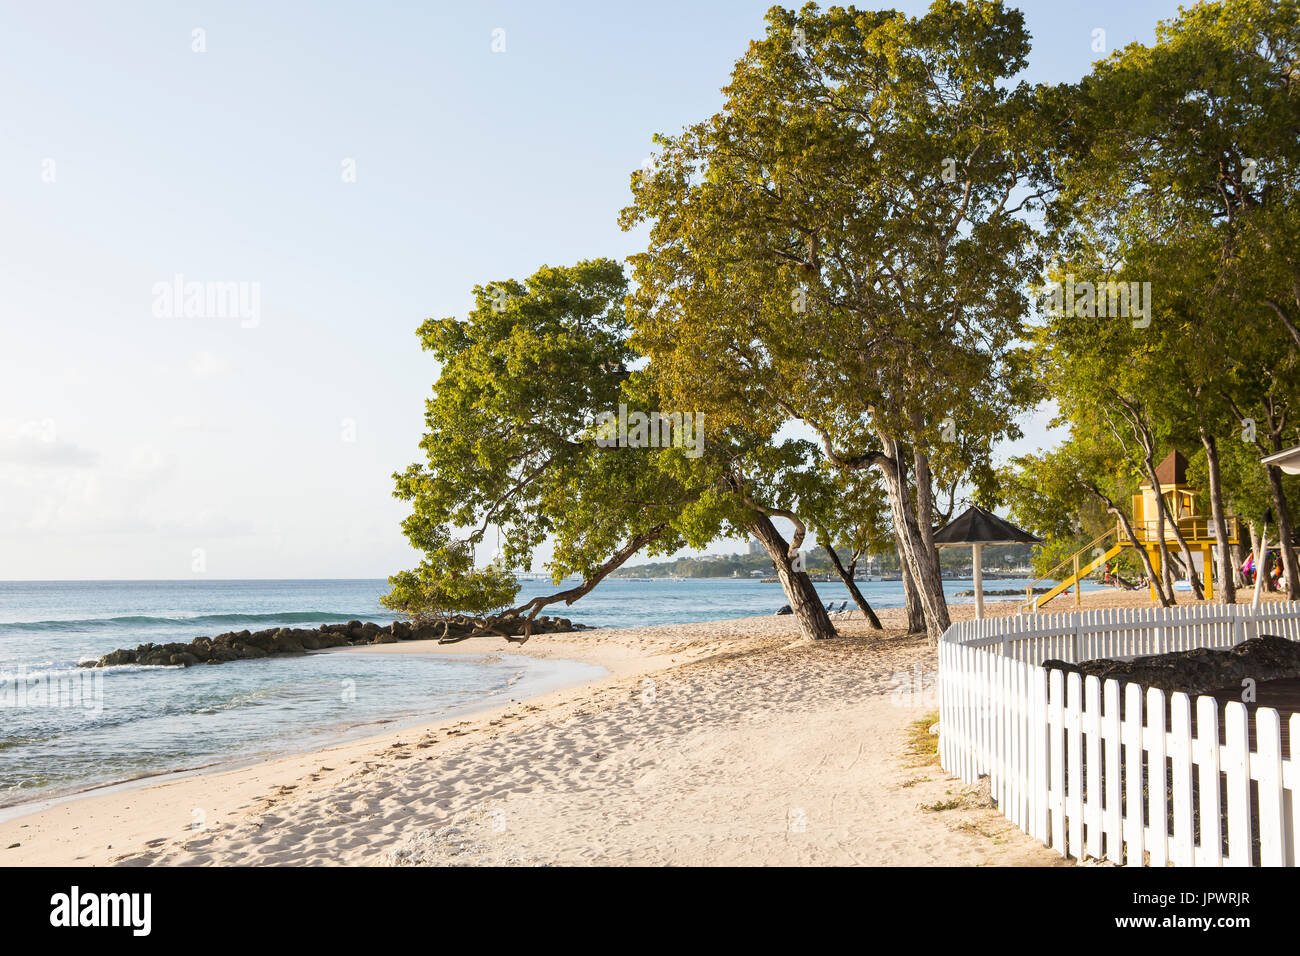 Almond Beach. Almond Beach is a public beach just north of Speightstown on the west coast of Barbados. The image shows how close to the beach the reso Stock Photo